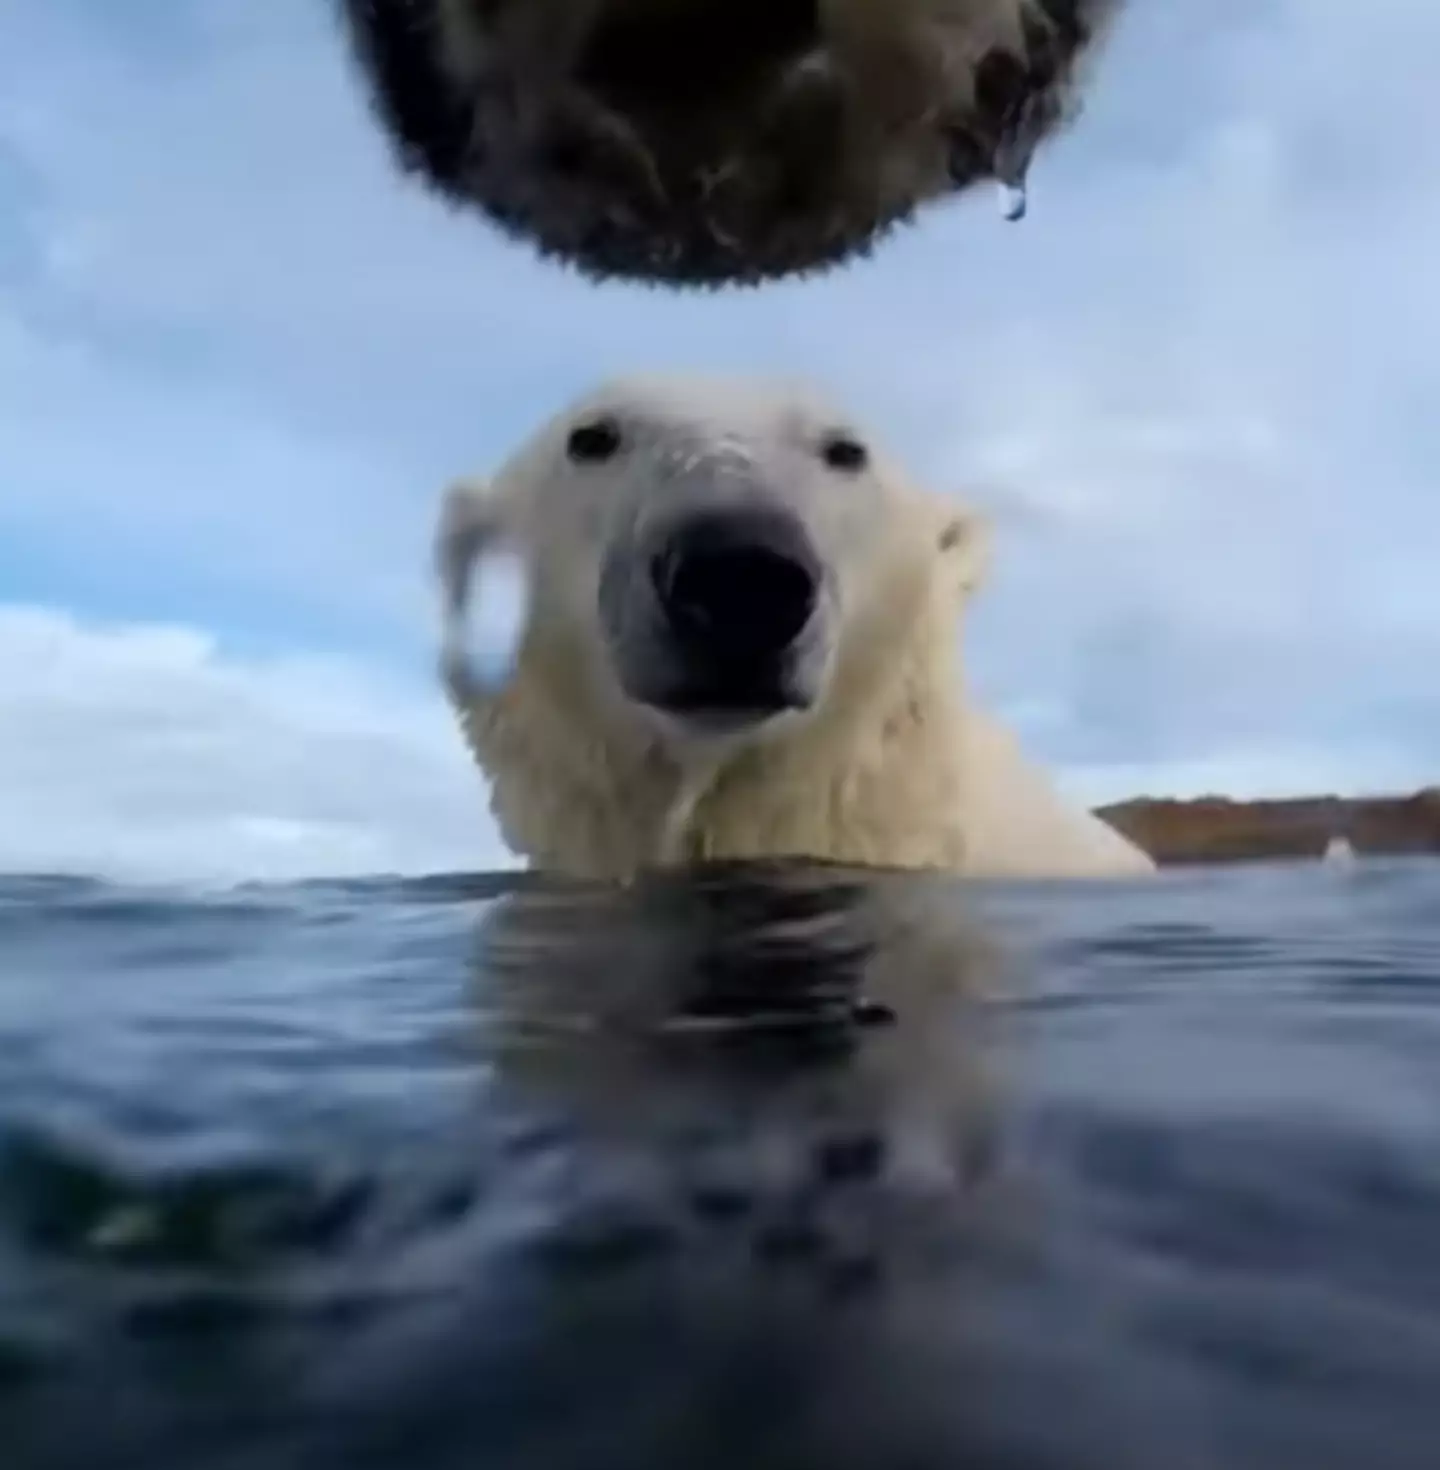 Polar bears have been found to behave a lot like dogs at times.